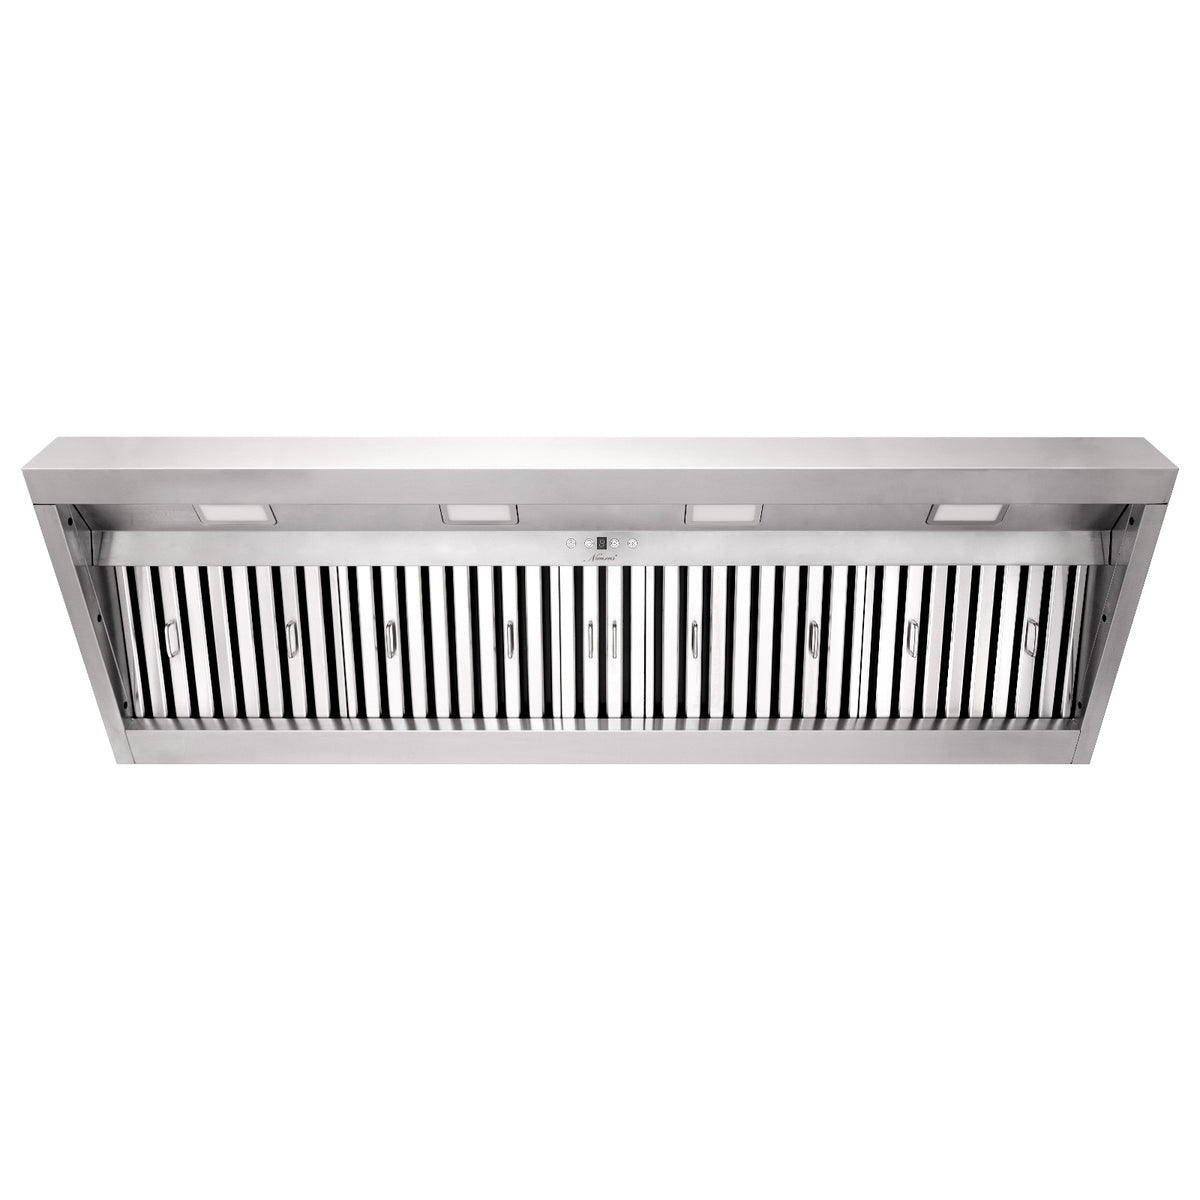 Range Hood Insert 60 Inch, 1200 CFM Built-in Kitchen Hood with 4 Speeds, Ultra-Quiet Stainless Steel Ducted Vent Hood Insert with Dimmable LED Lights and Dishwasher Safe Filter